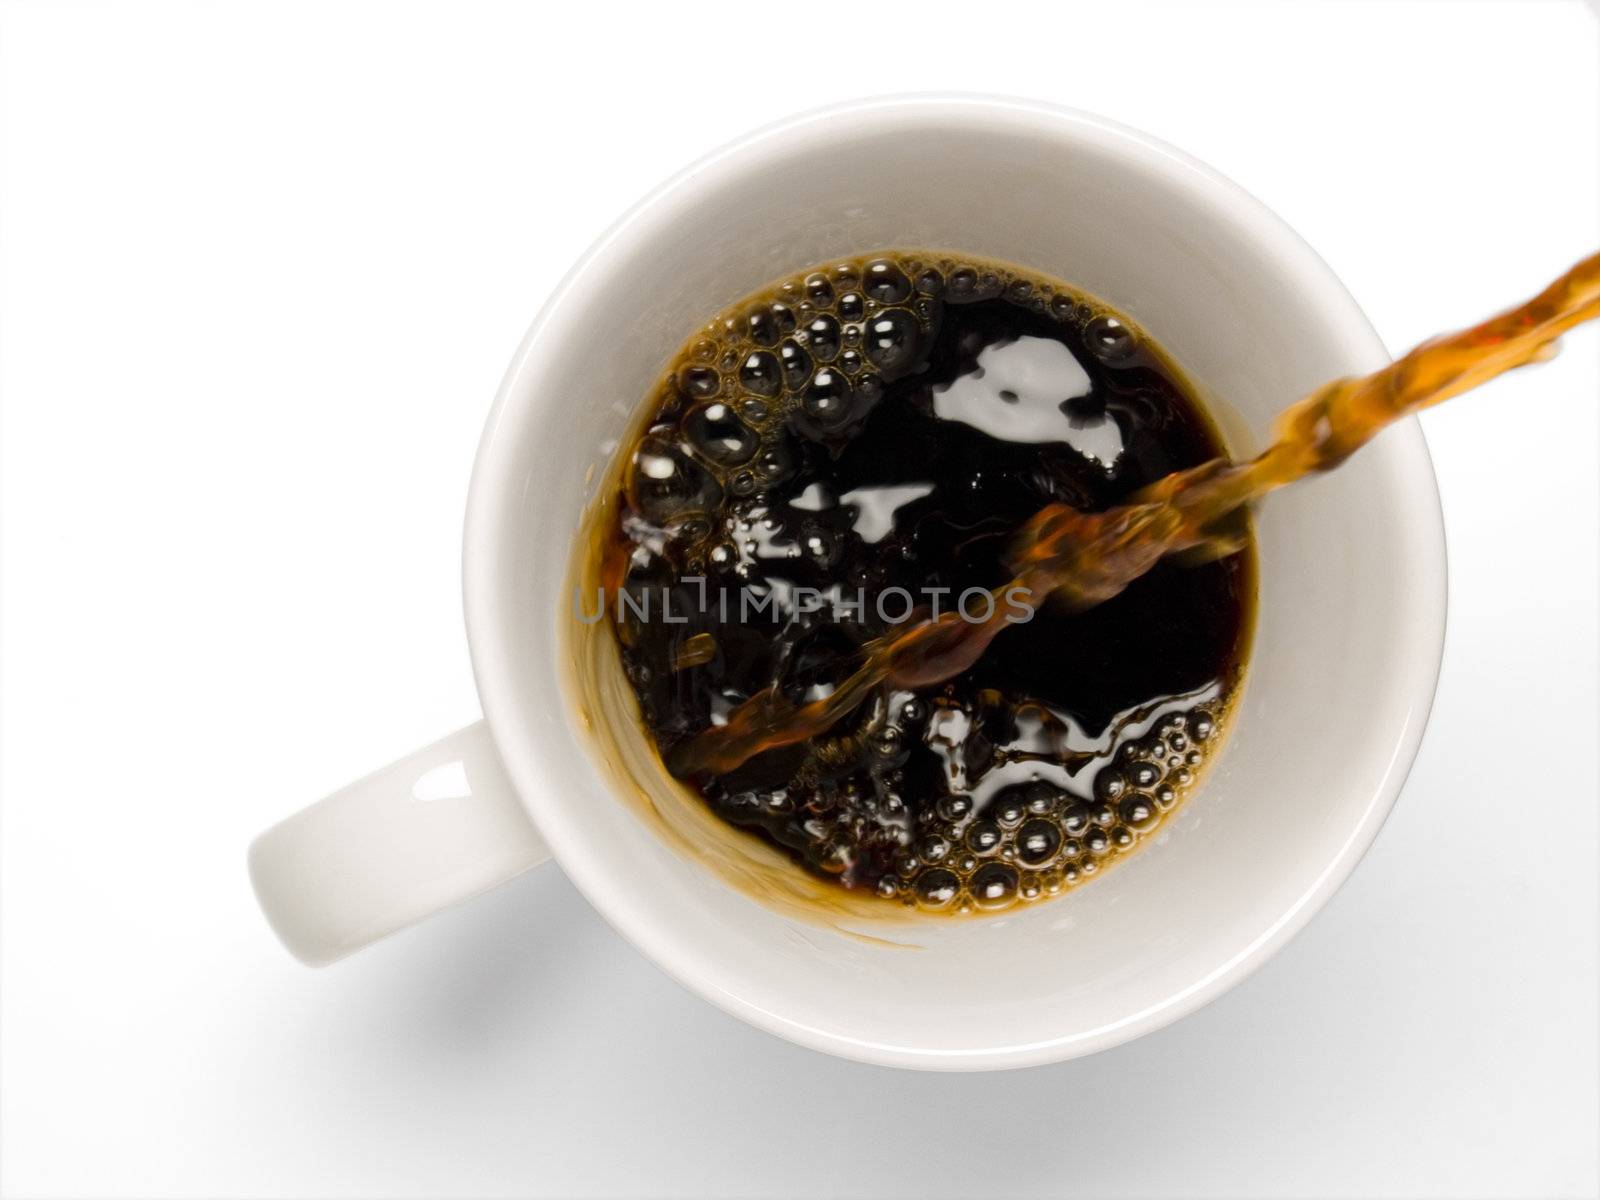 Fresh coffee being poured into a coffee cup on a white background.